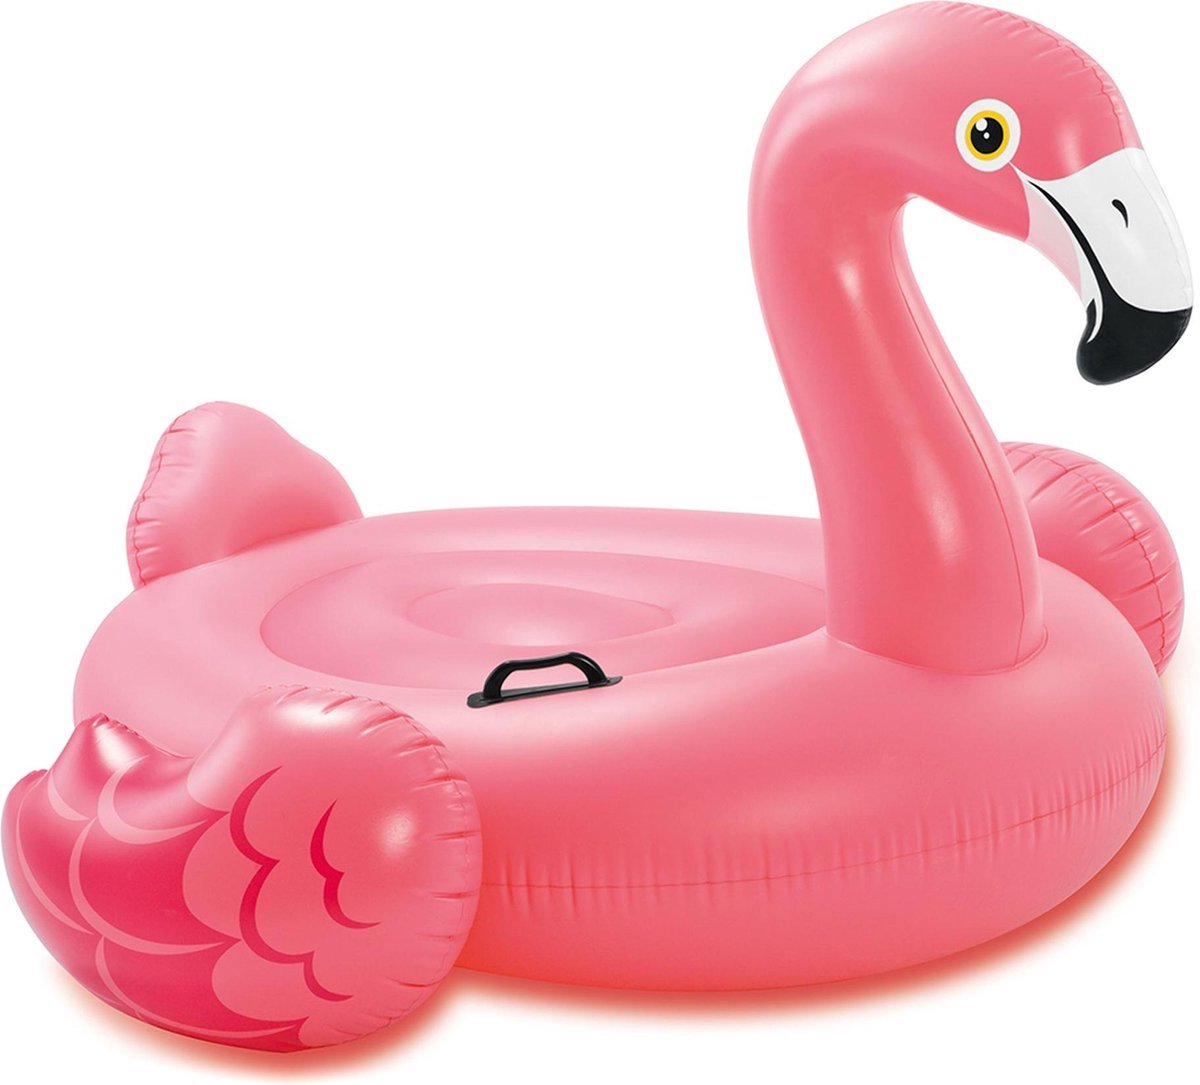 opblaas Flamingo - intex - luchtbed - zwemmen - strand - inflatable - ride-on